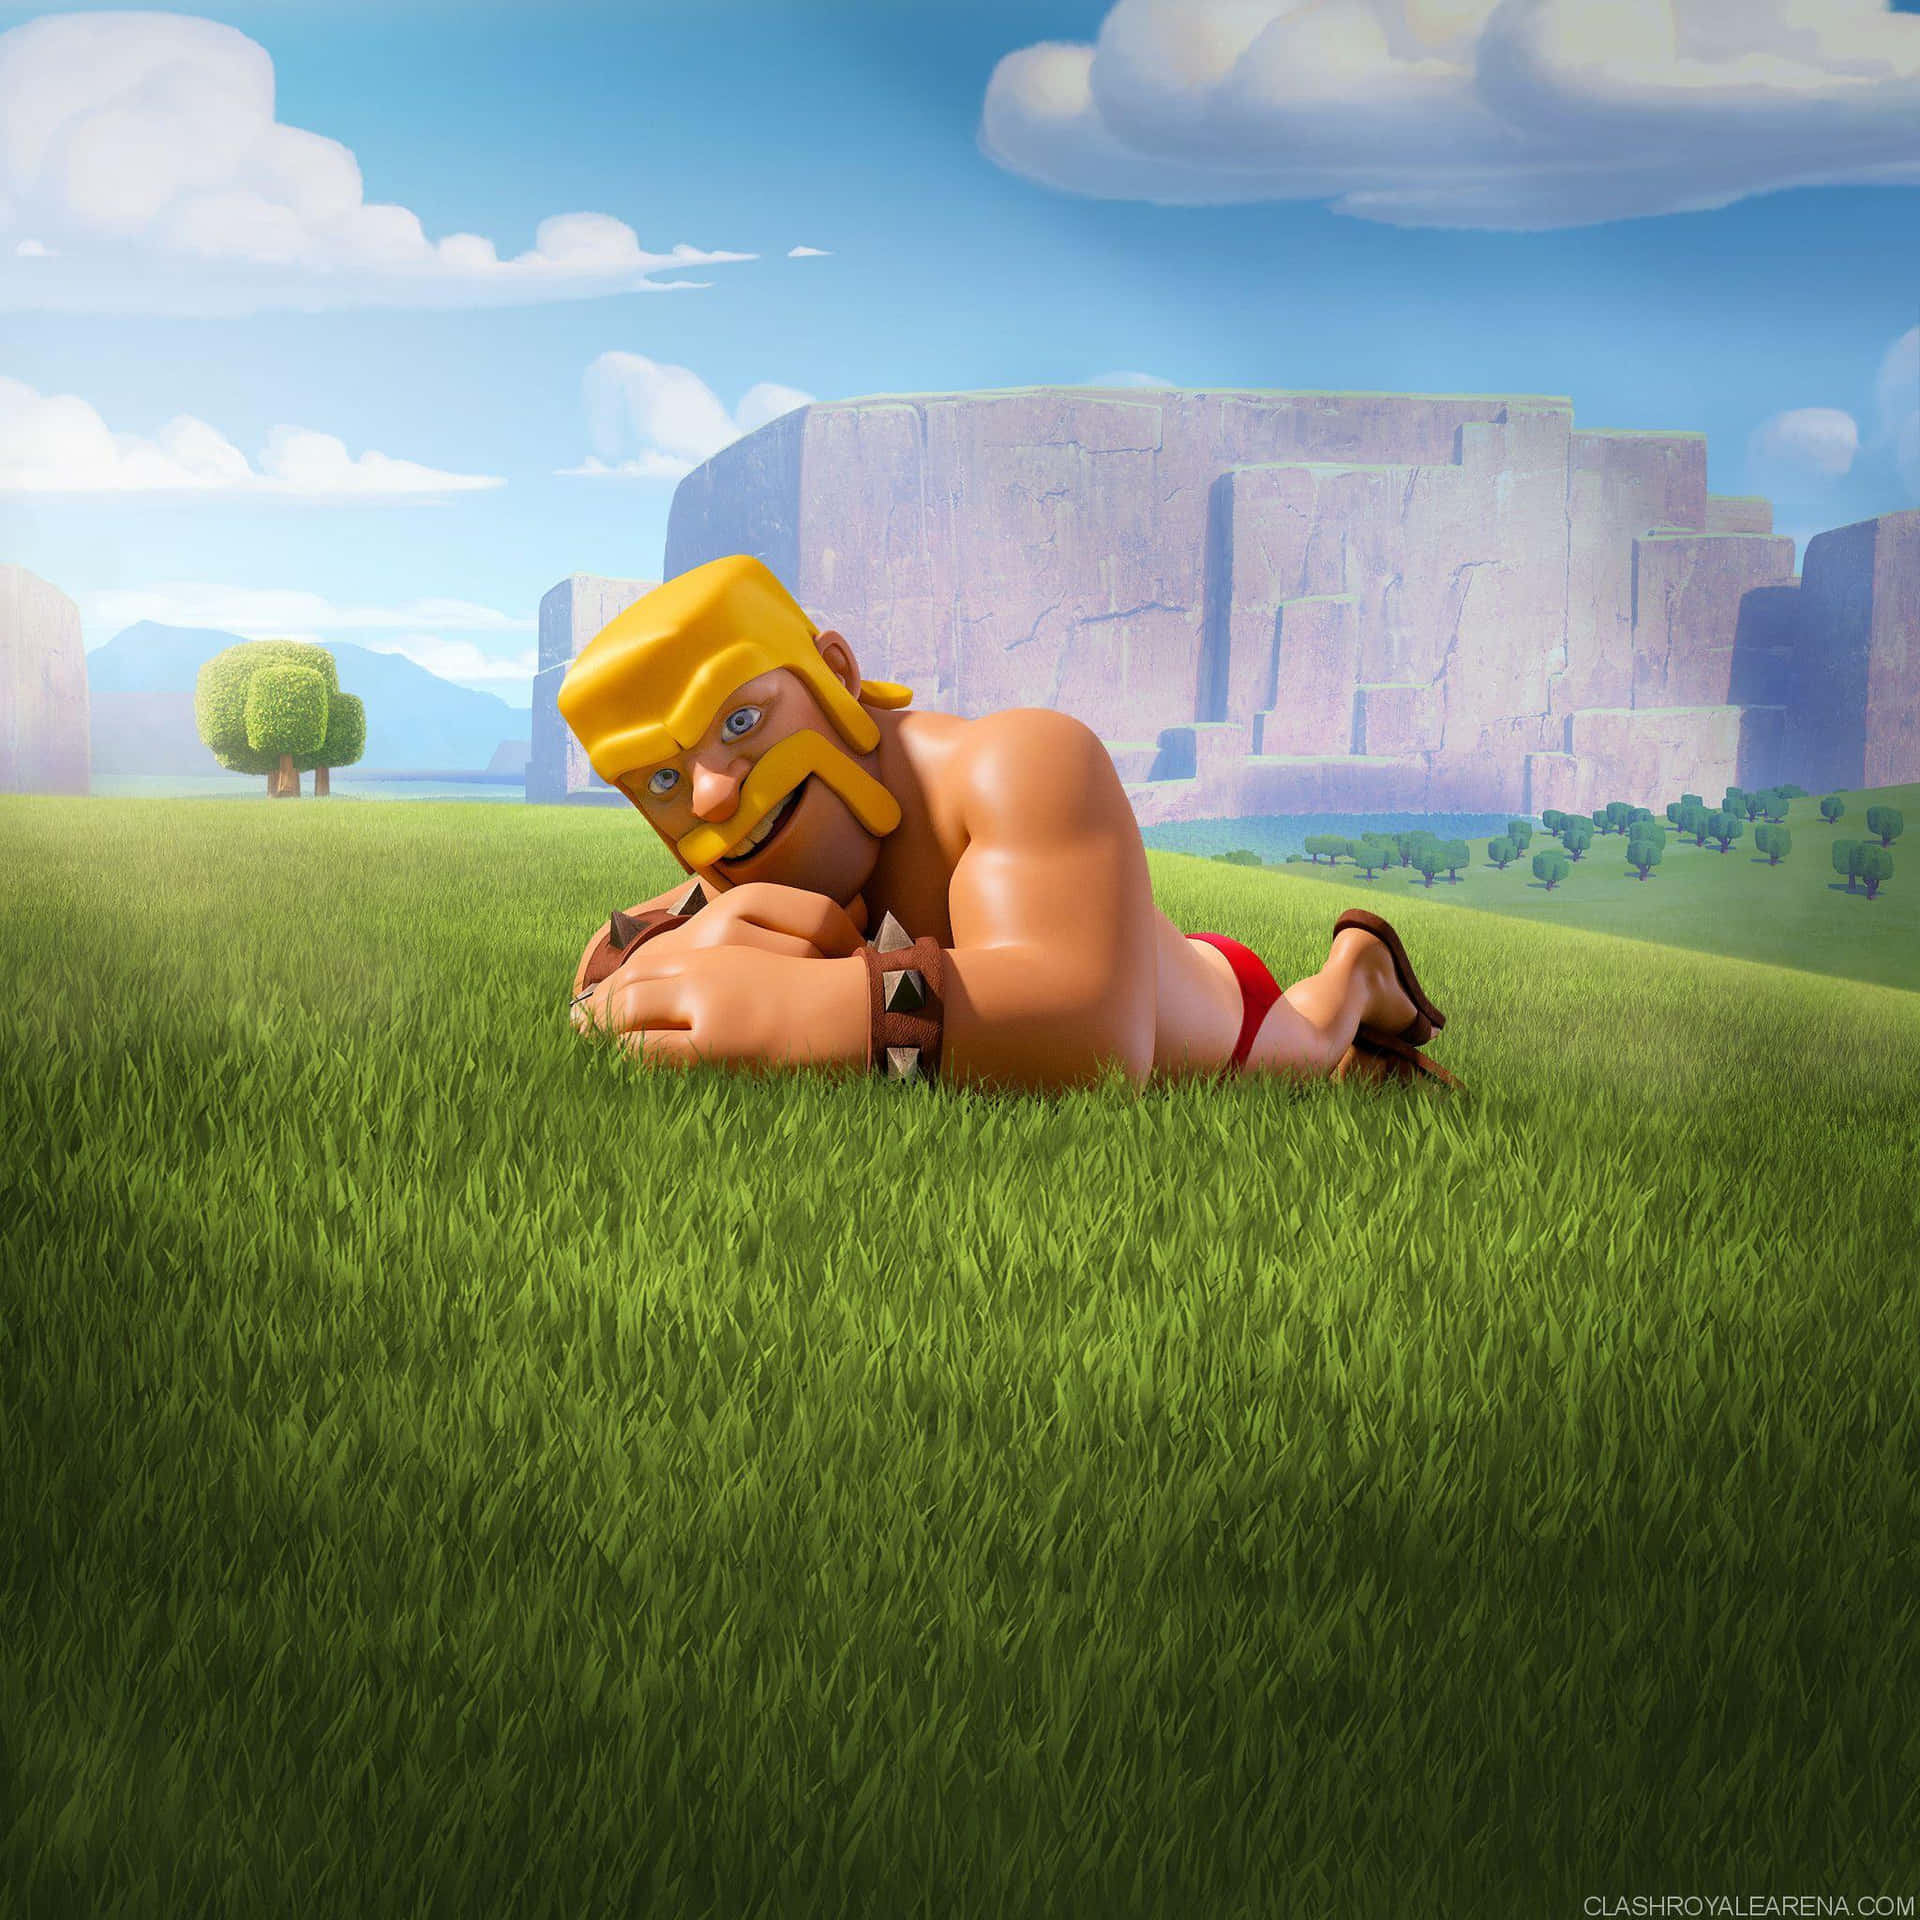 Clash Of Clans - Hd Wallpapers